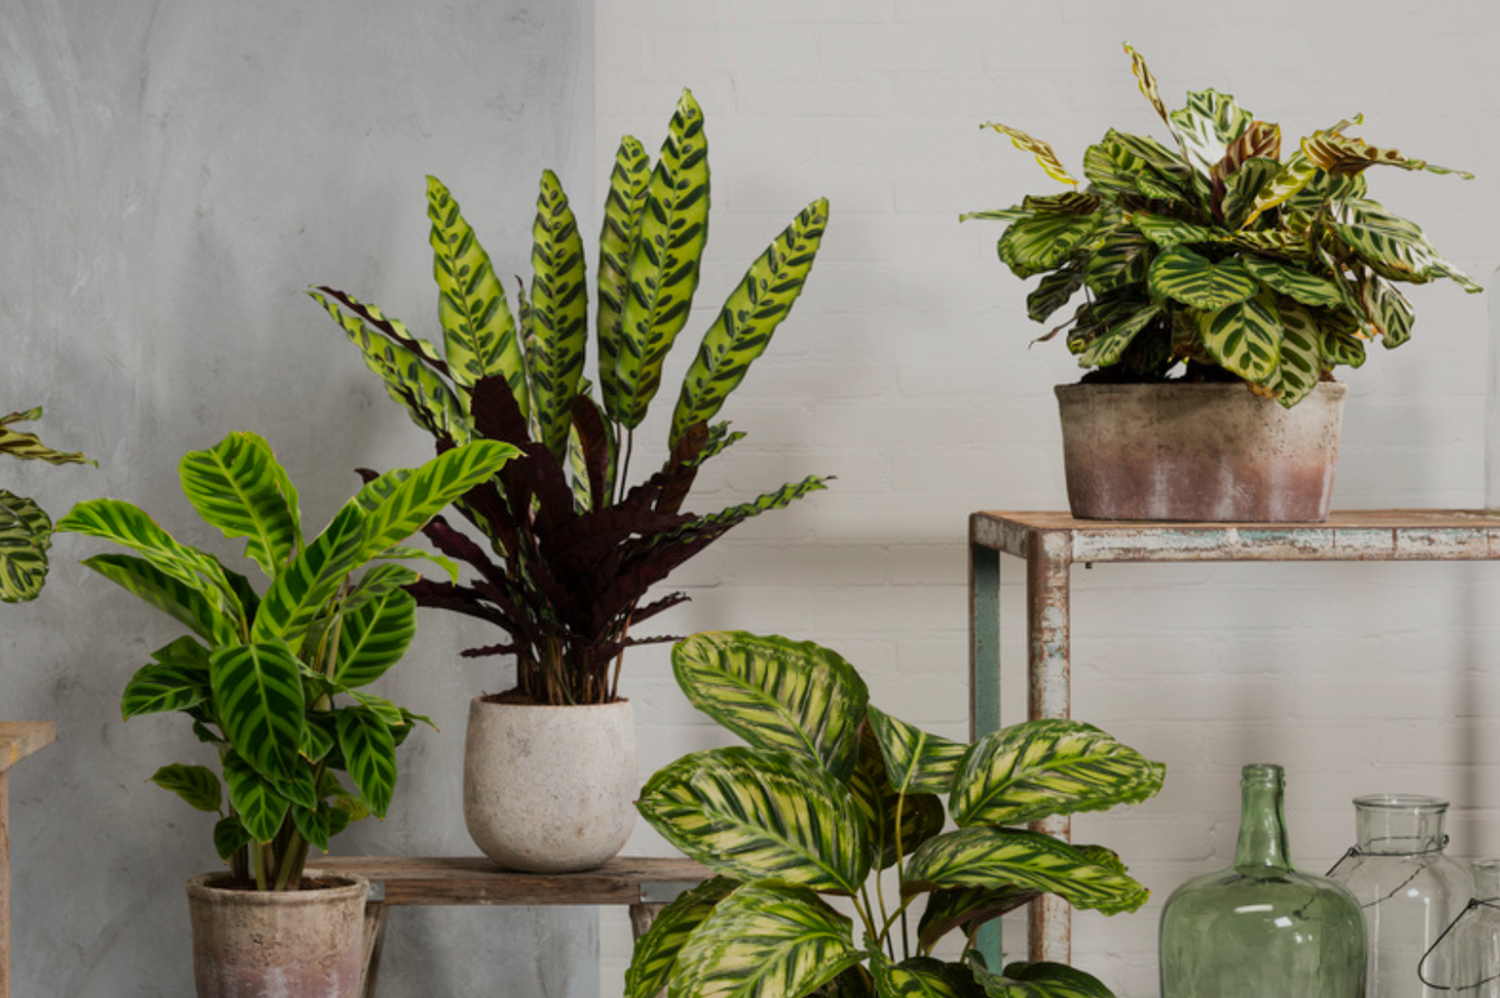 PERFECT PLANT en soldes chez THE BRADERY